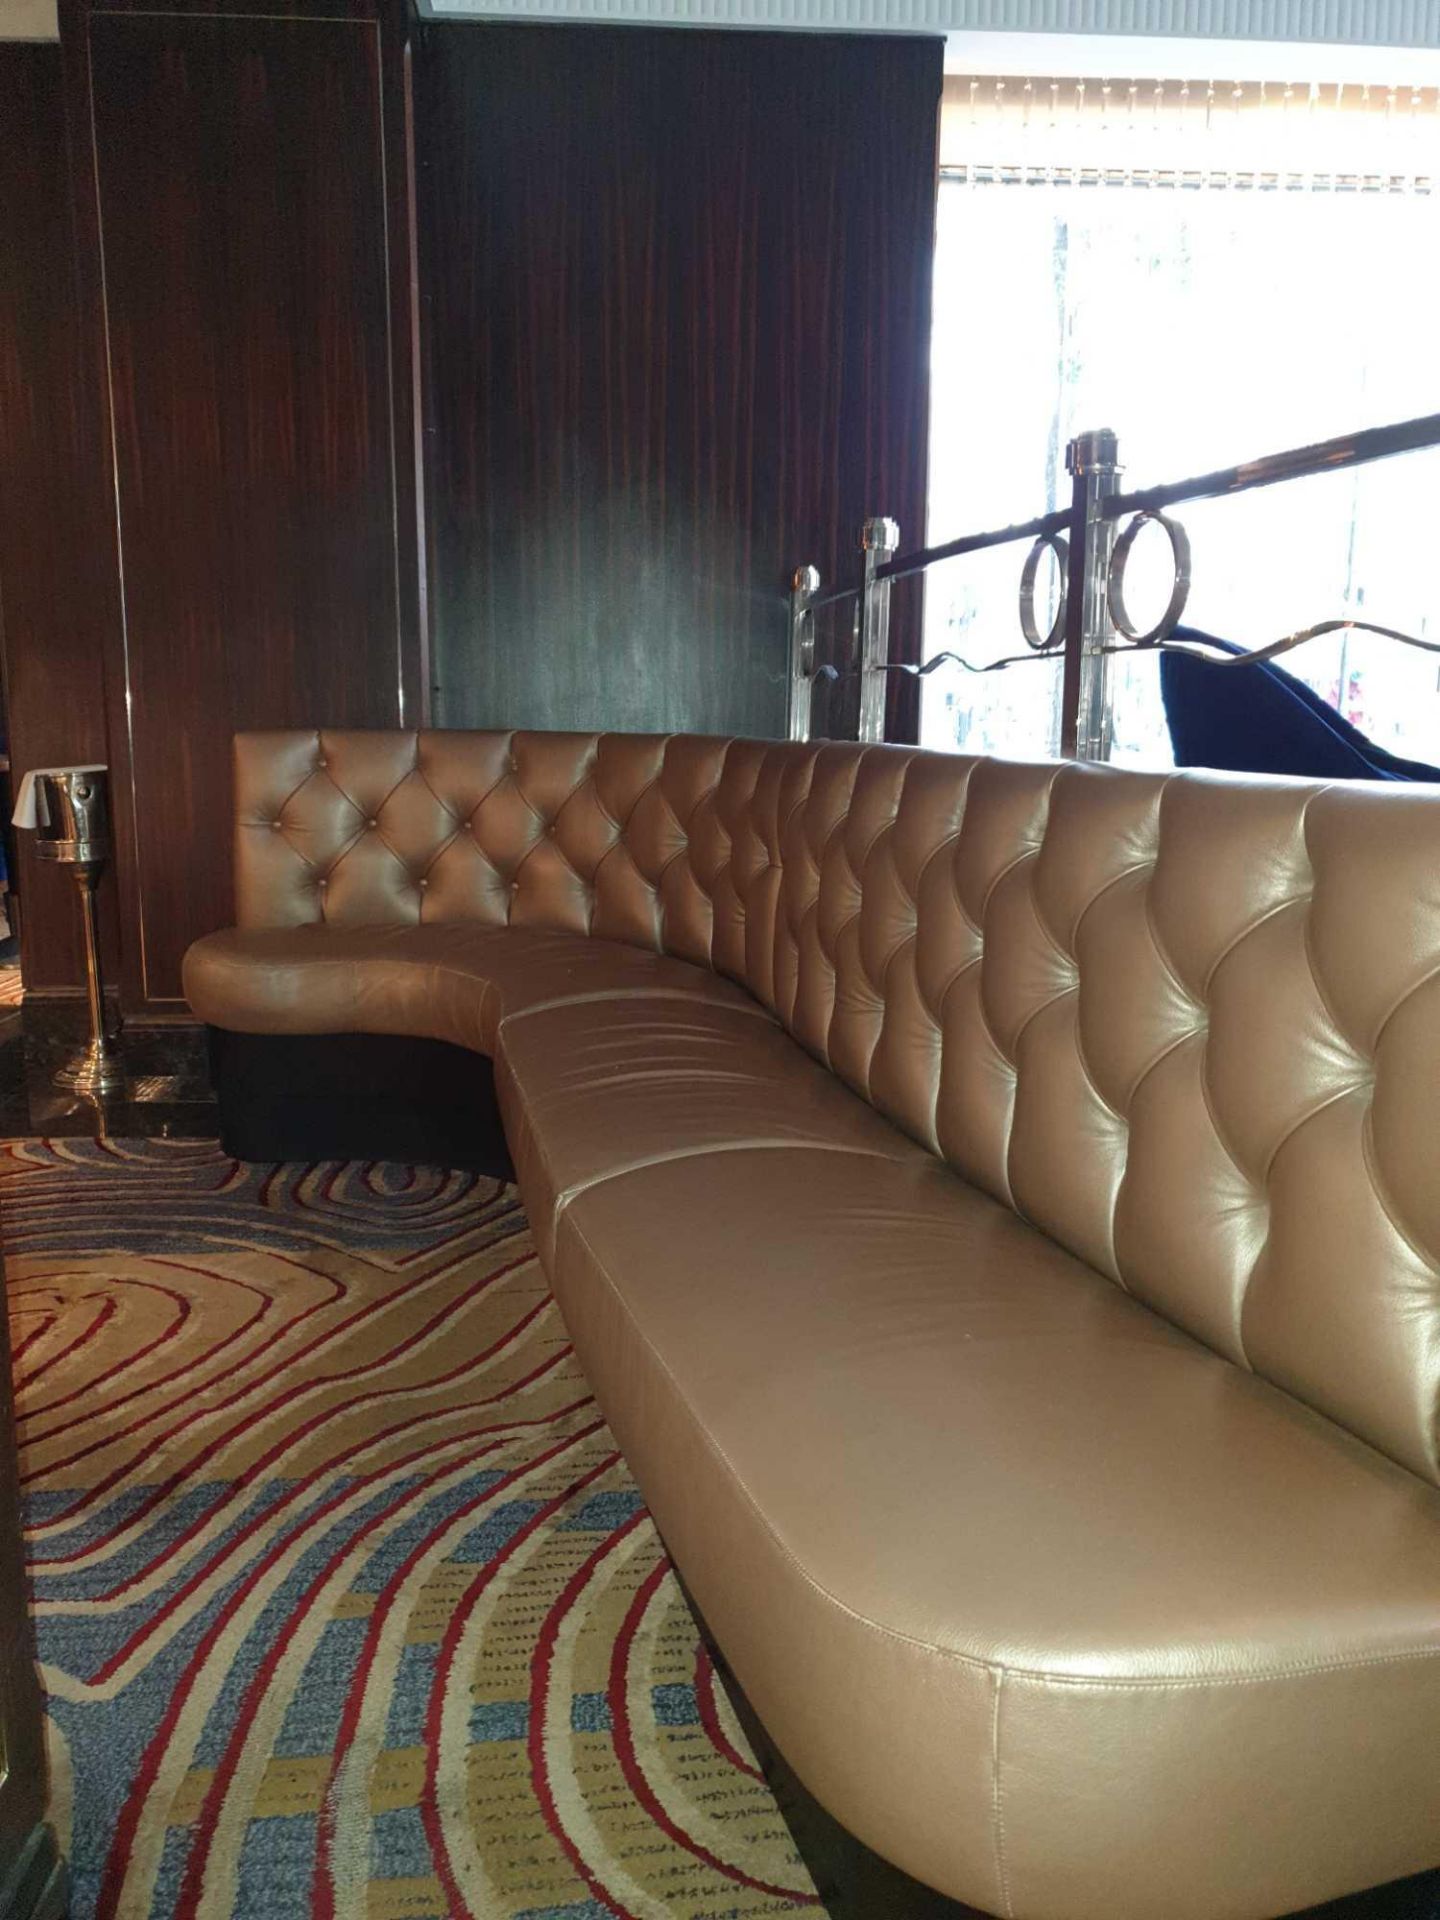 Edelman Leathers Extra Long Serpentine Banquet Seating In Gold Leather With Tufted Button Back